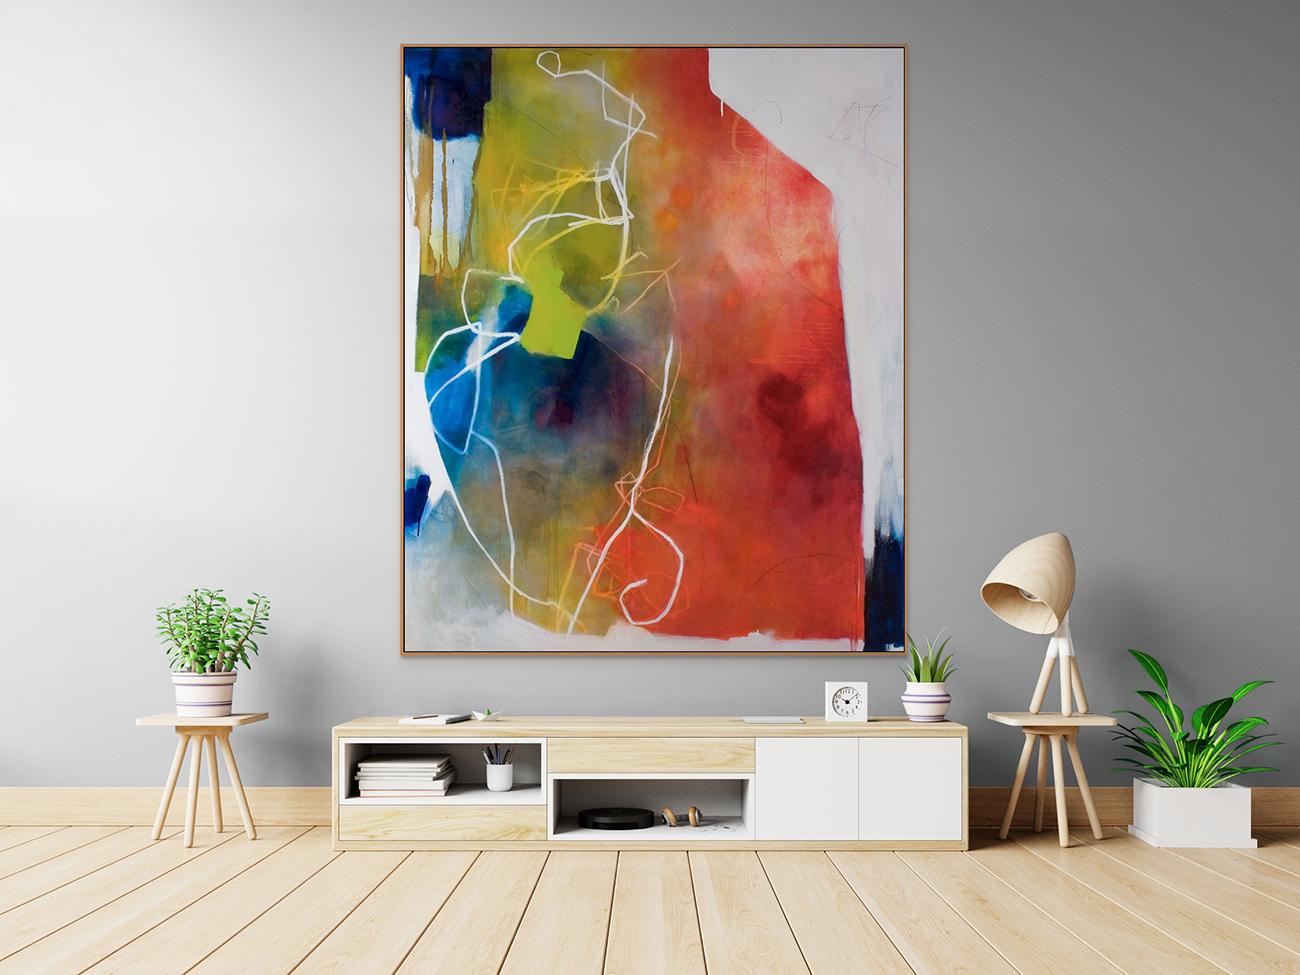 Attrahere Noted (Abstract painting) - Painting by Xanda McCagg